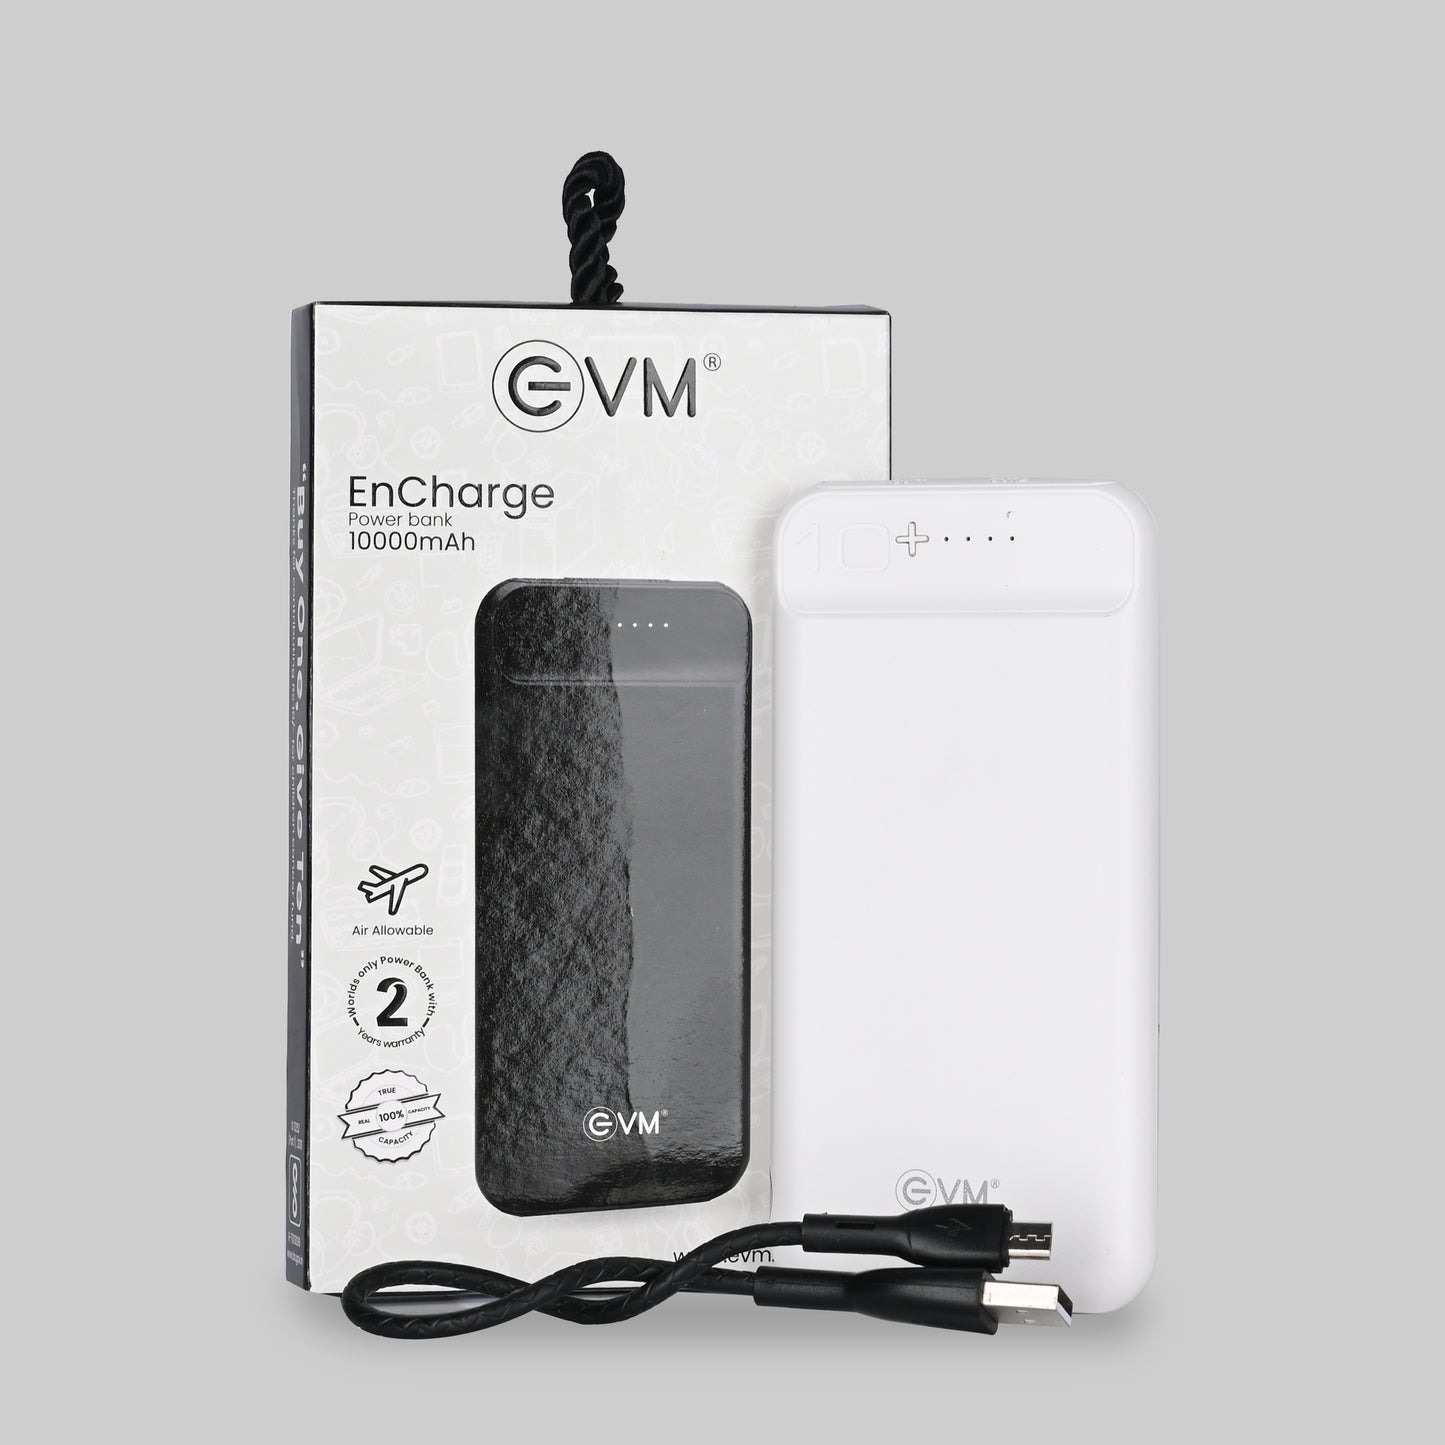 Personalized 10000mAh Power Bank - For Corporate Gifting, Event Gifting, Freebies, Promotions - EnCharge P0109